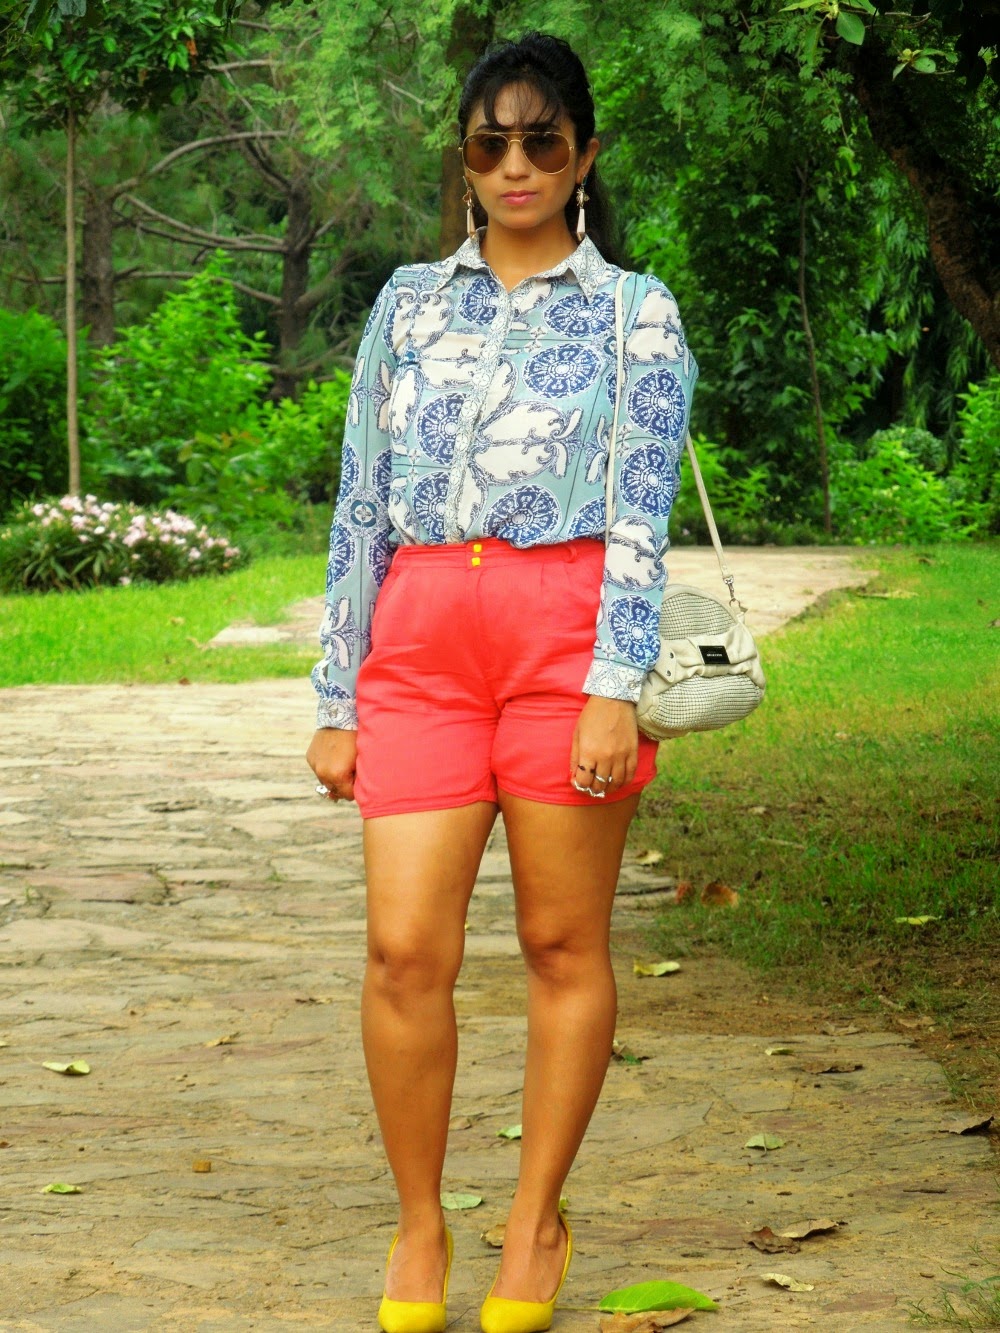 Guide to Wearing Optic Prints and High Waist Shorts